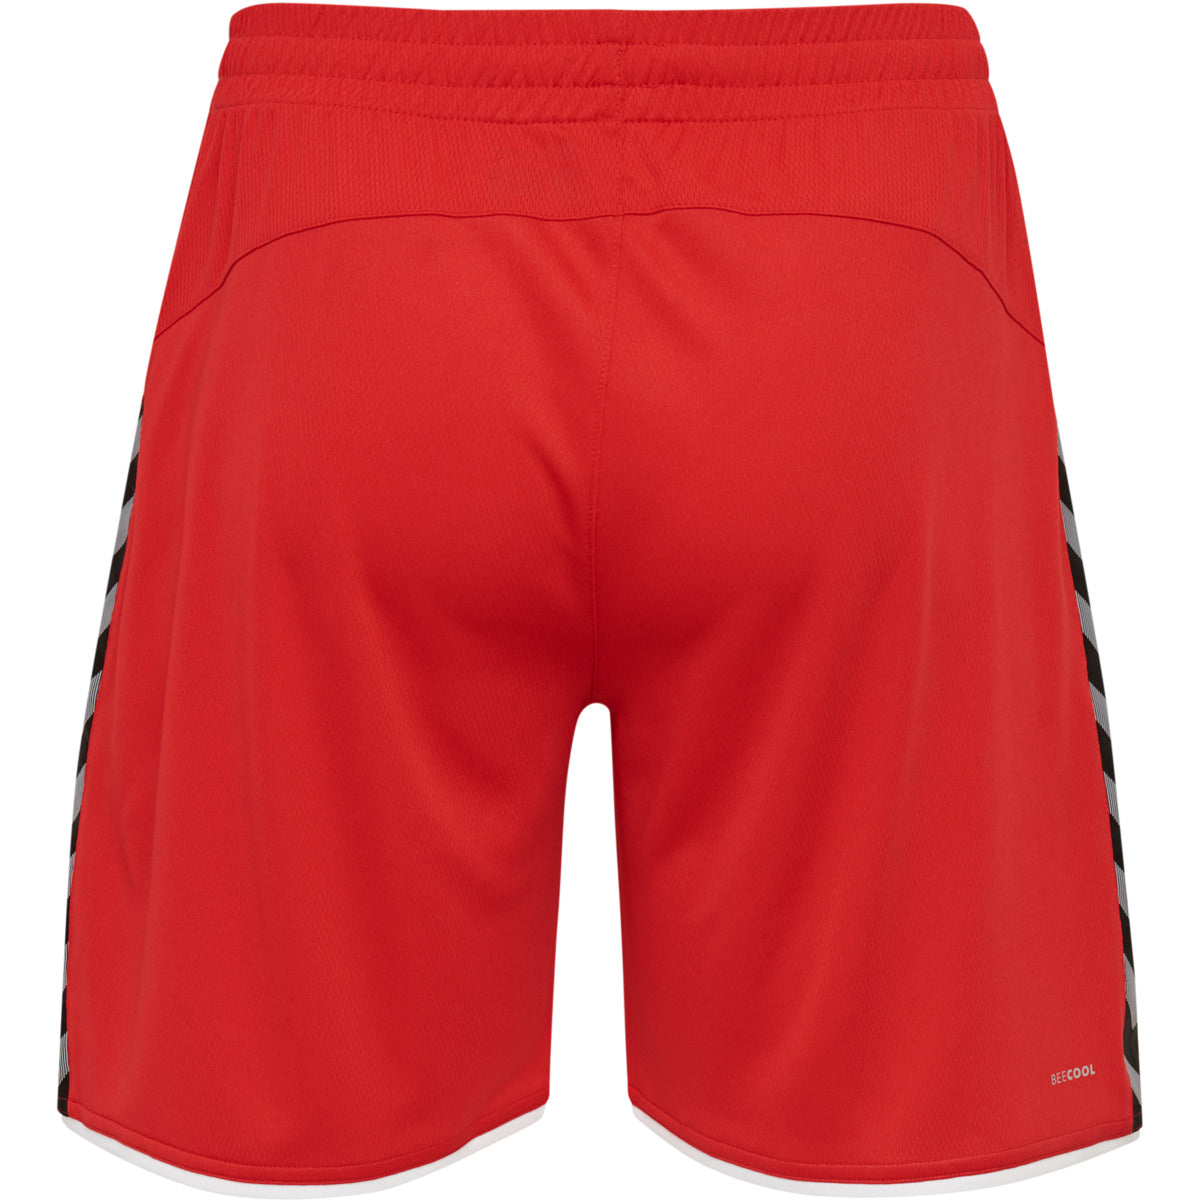 hmlAUTHENTIC KIDS POLY SHORTS TRUE RED